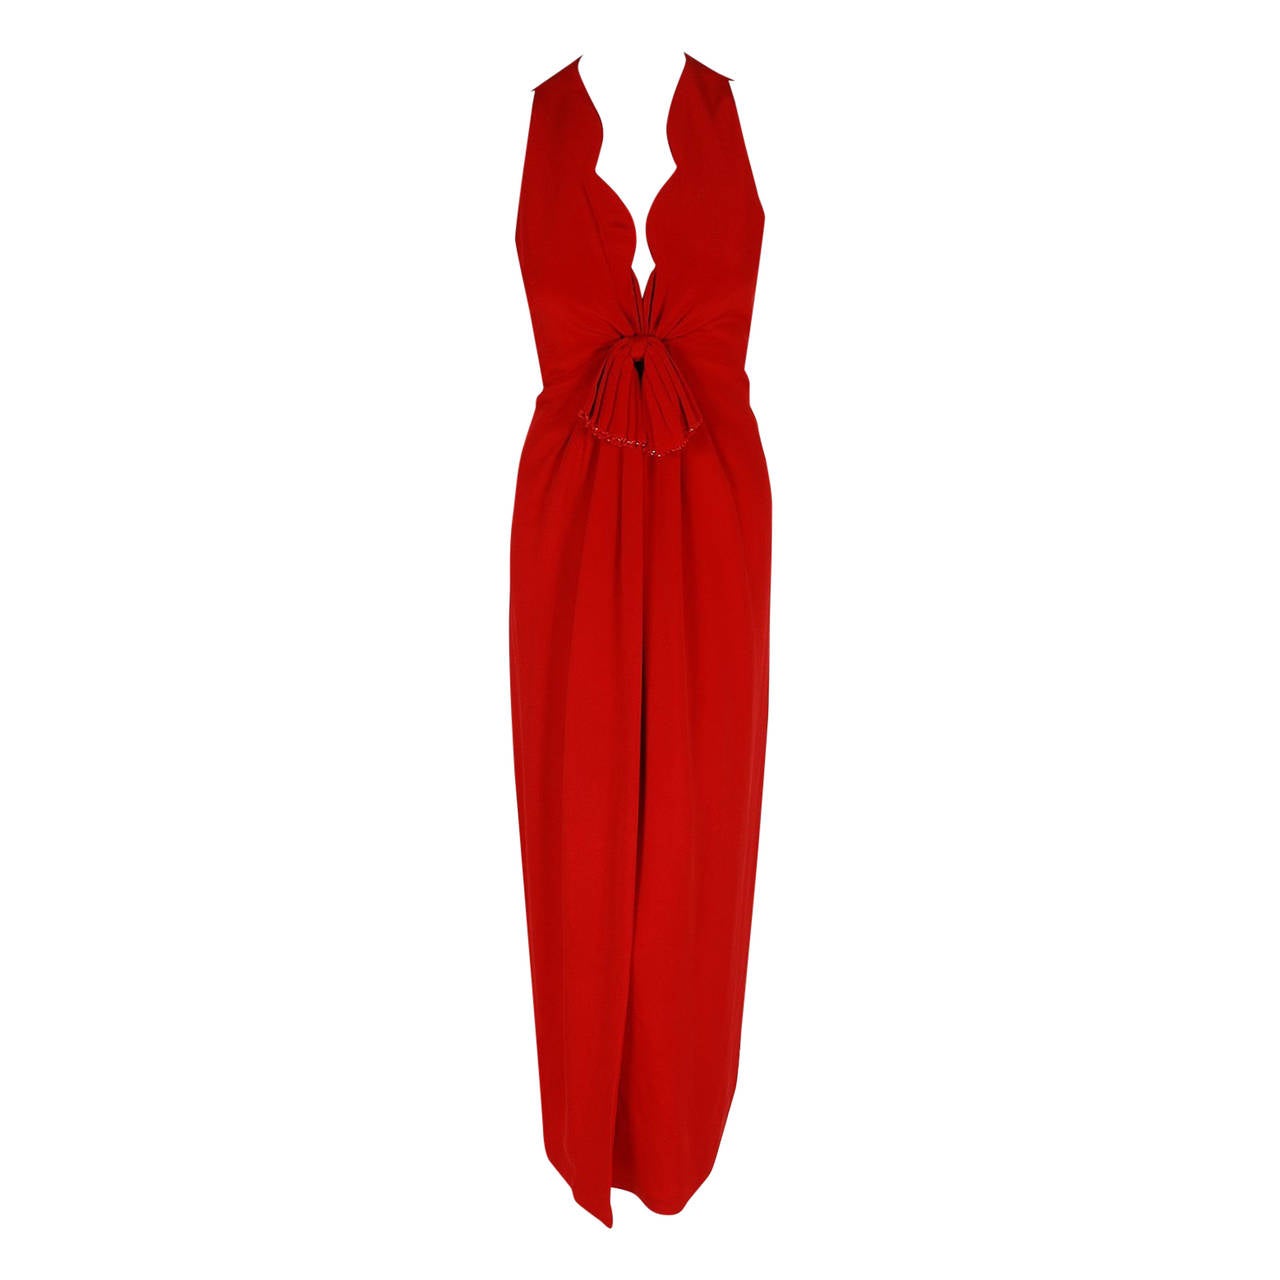 1977 Galanos Couture Ruby-Red Silk Scalloped Sleeveless Plunge Column Wrap Gown